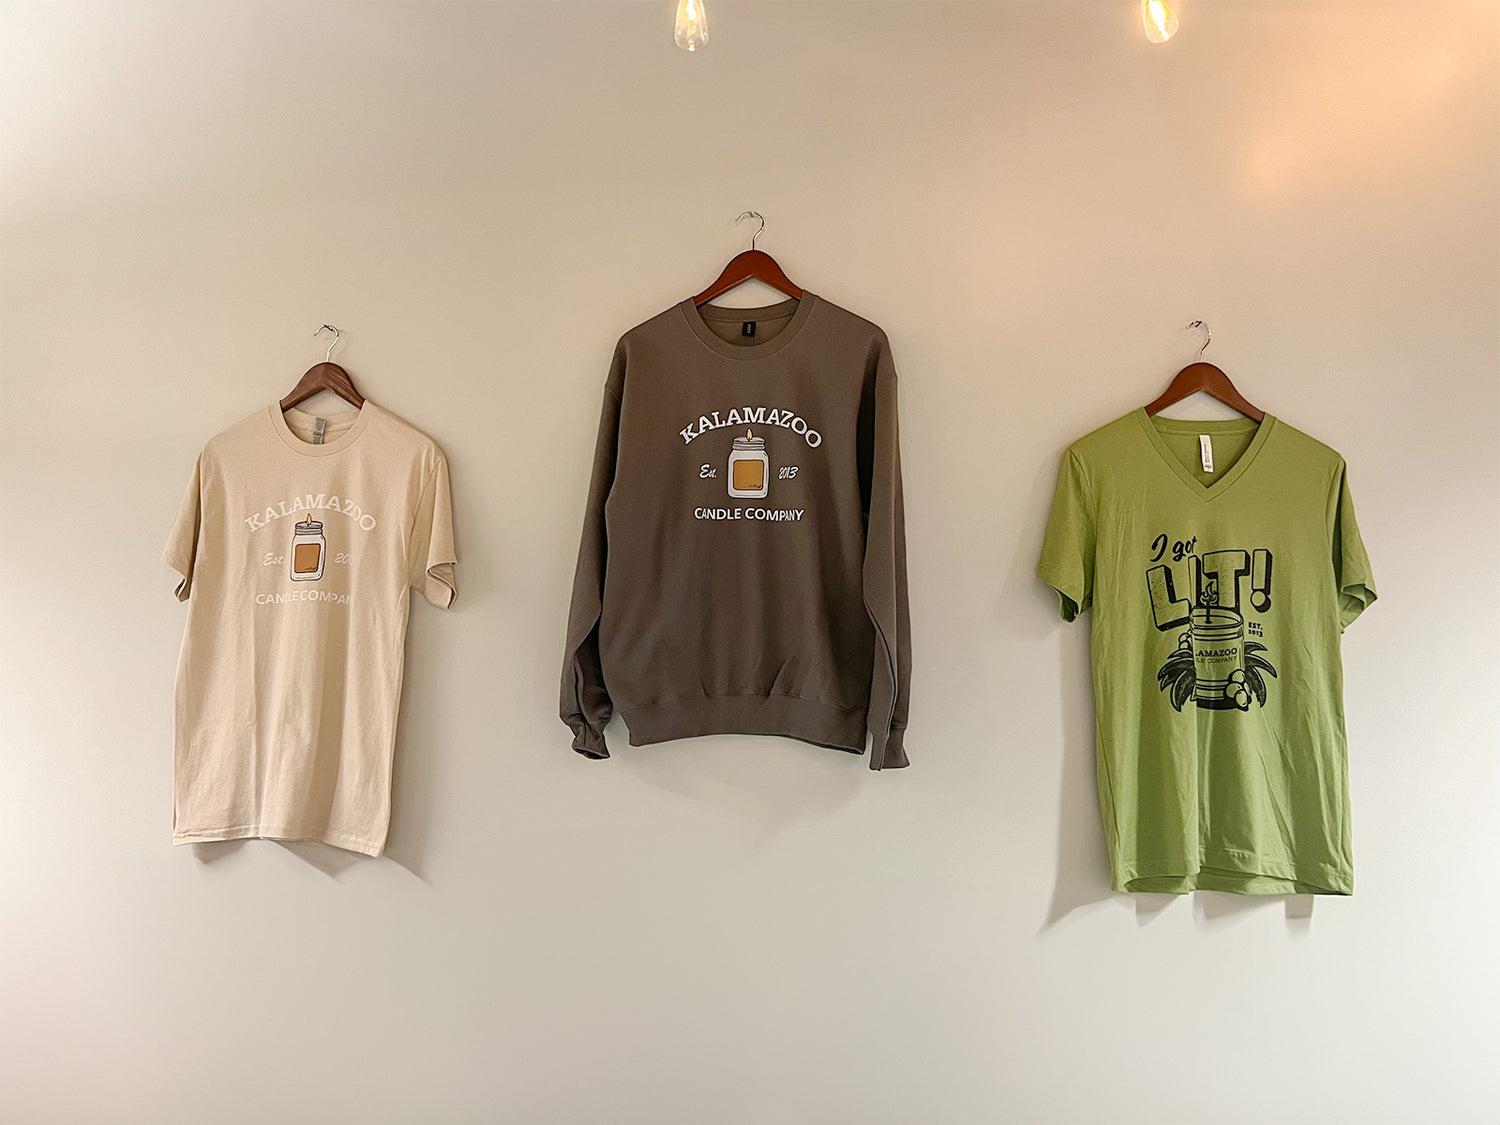 3 Merchandise Shirts hanging on a wall.